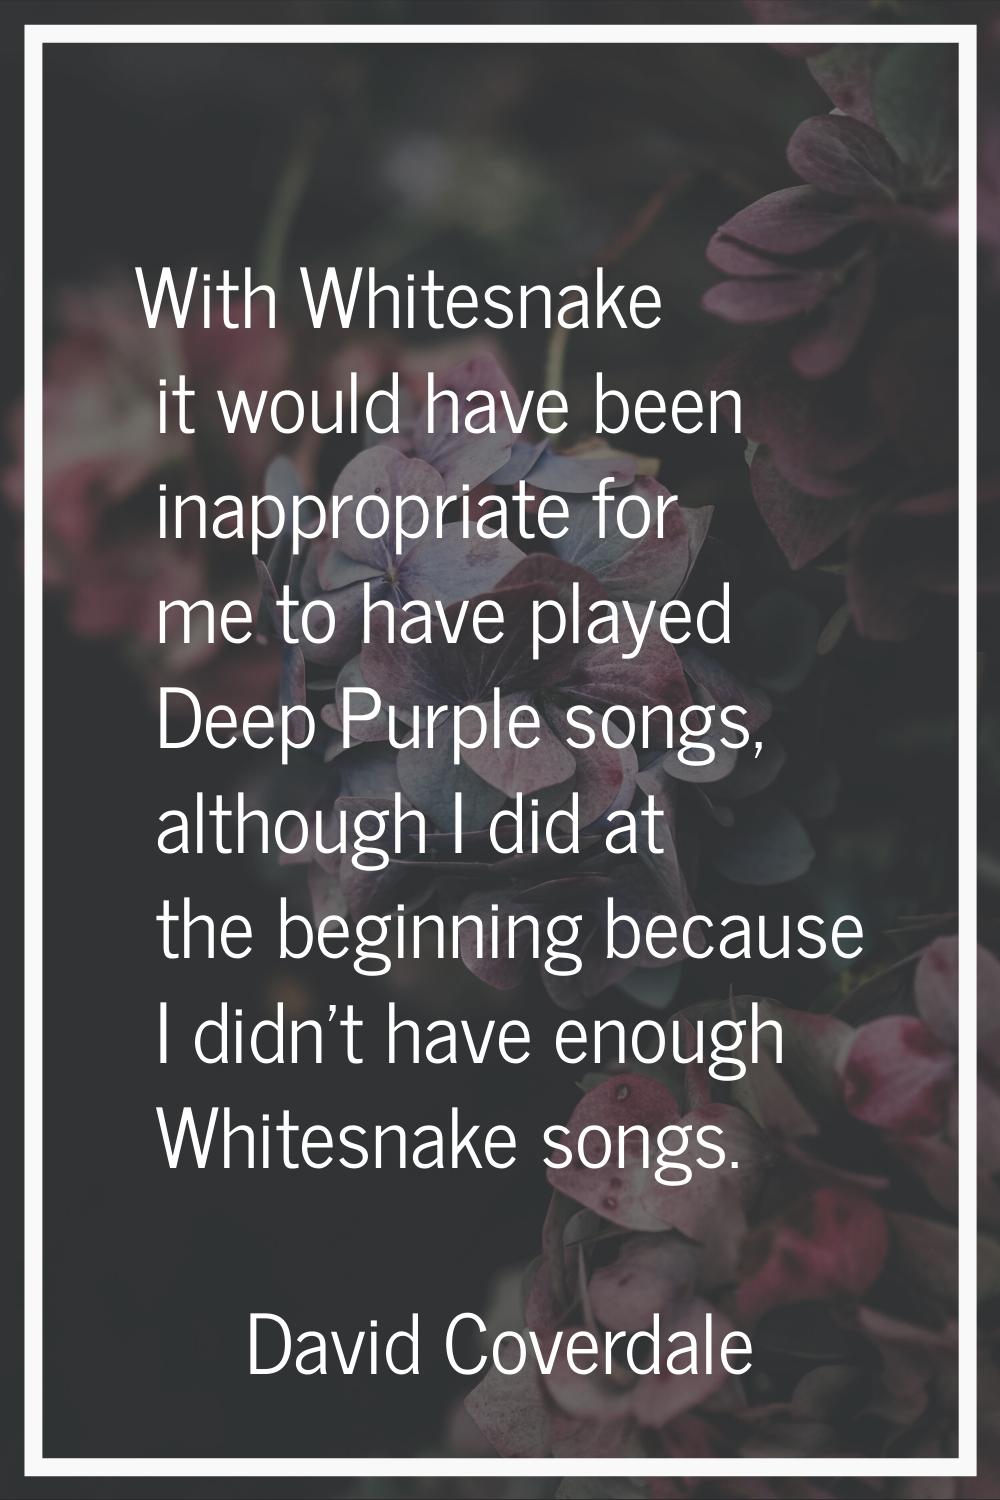 With Whitesnake it would have been inappropriate for me to have played Deep Purple songs, although 